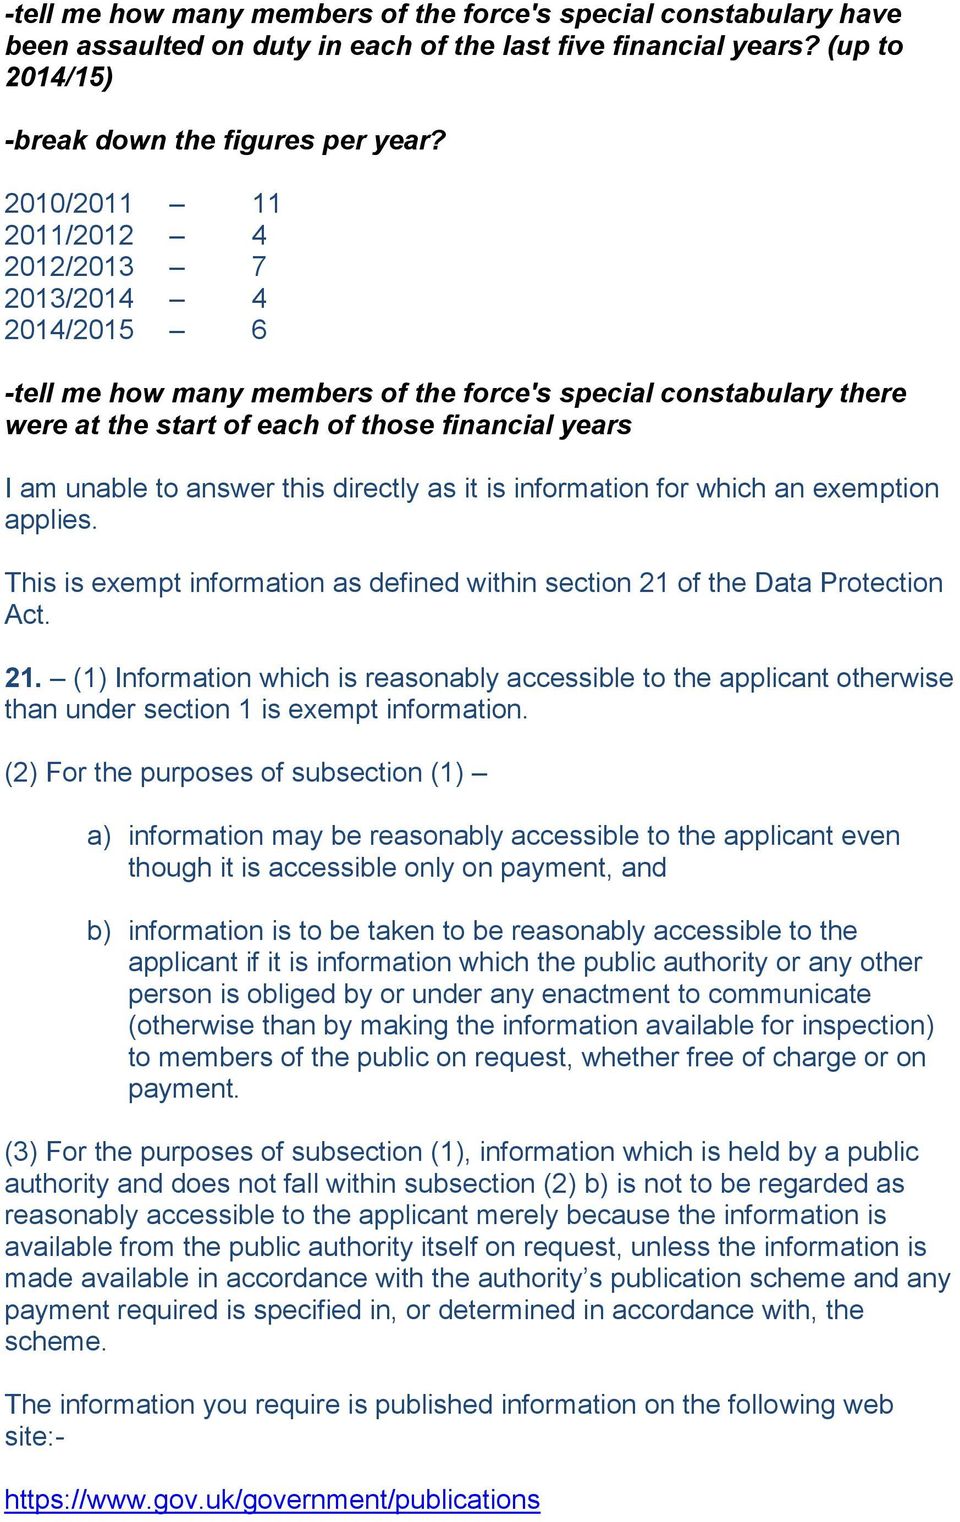 answer this directly as it is information for which an exemption applies. This is exempt information as defined within section 21 